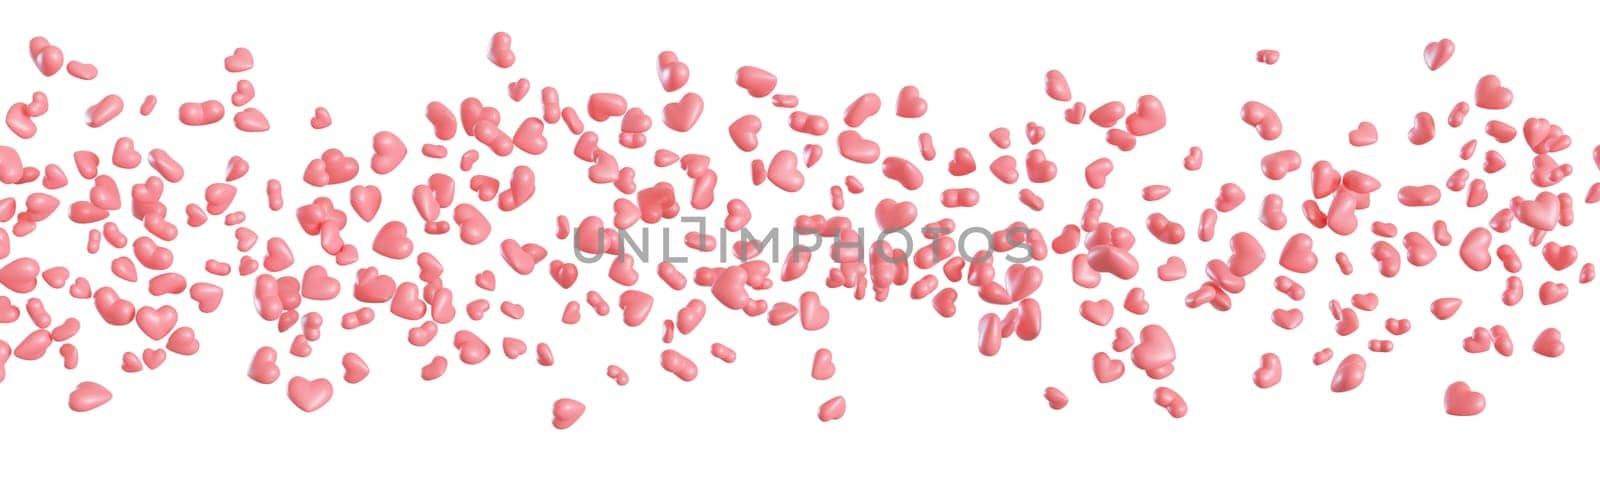 Pink hearts line isolated on white background. Cute foreground. Border. Particles row. Cut out graphic design elements. Valentine's Day decoration. Small hearts. Love symbol. 3D render